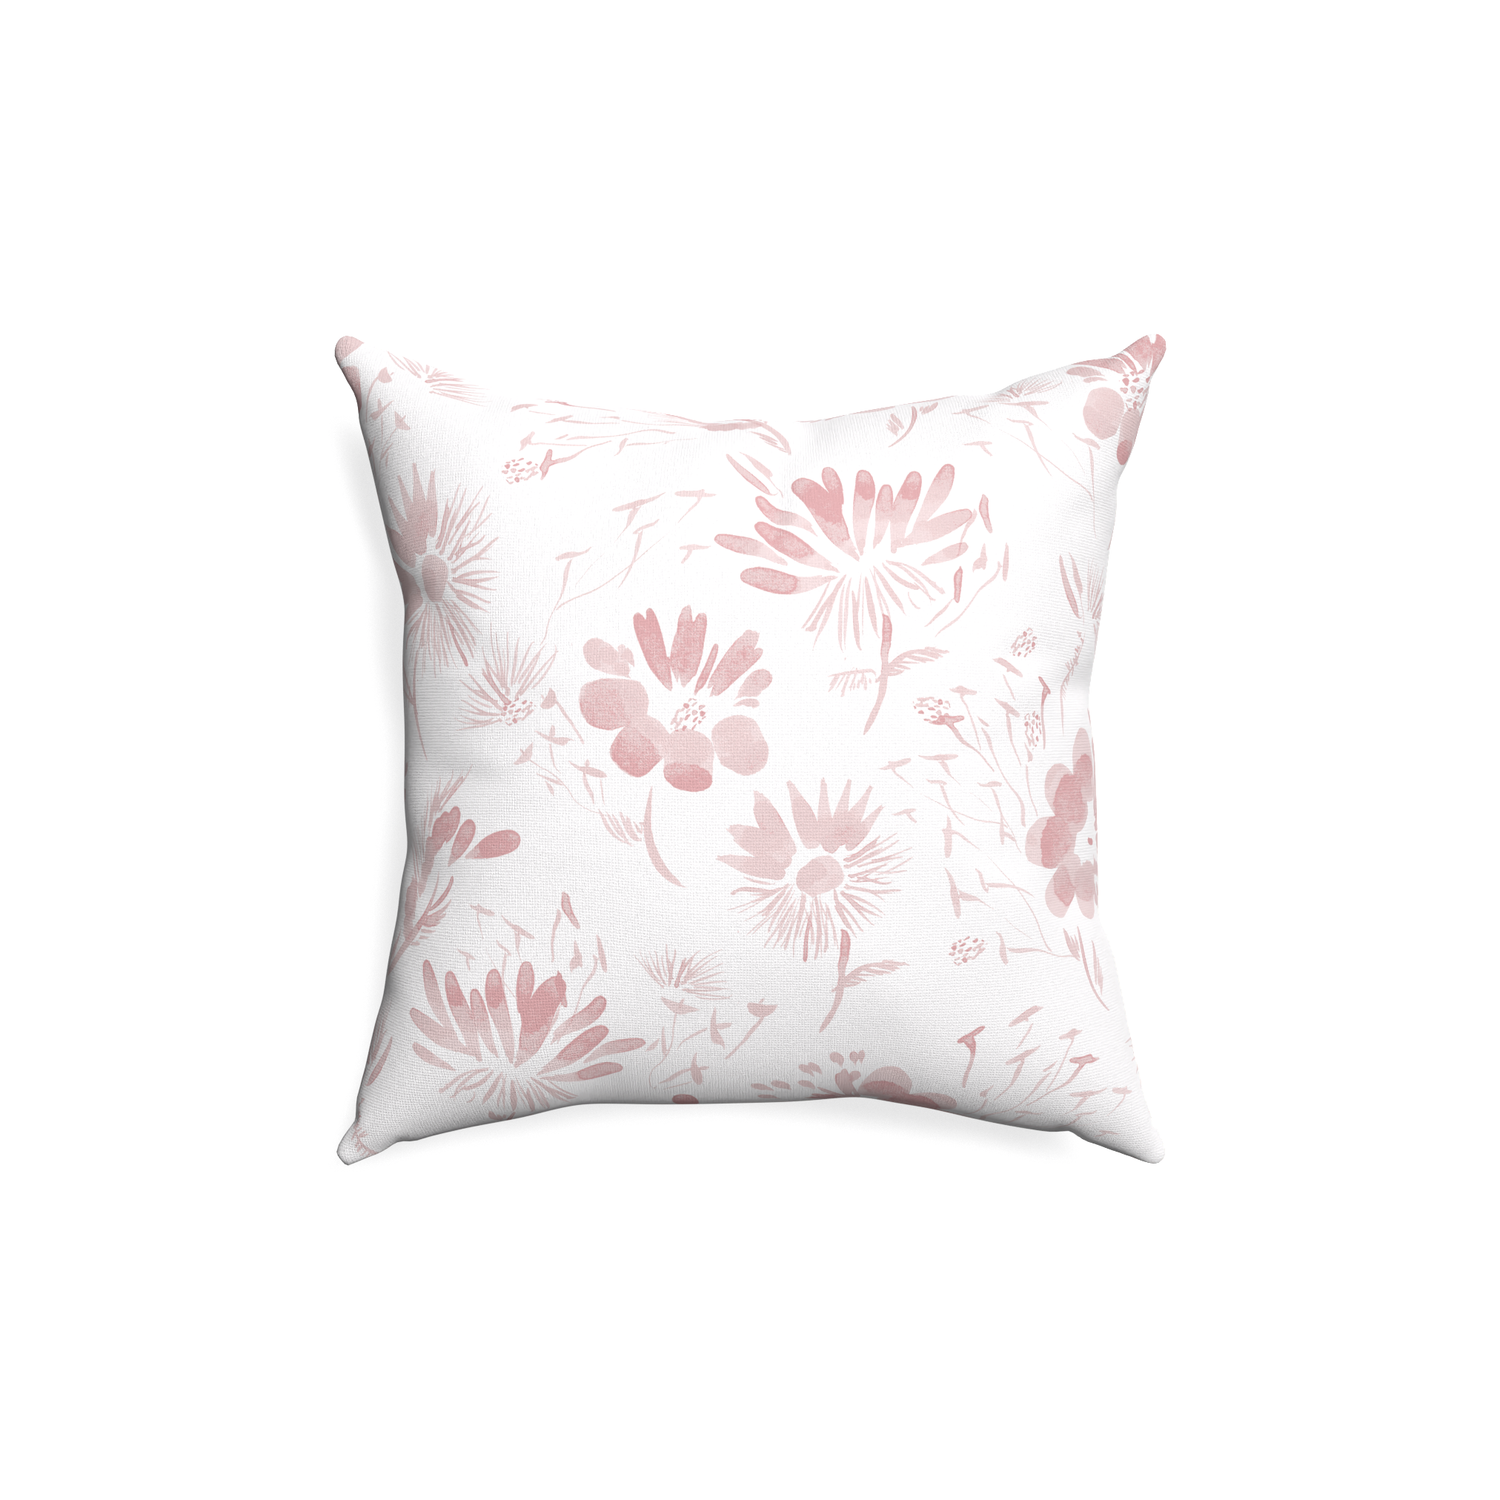 18-square blake custom pink floralpillow with none on white background